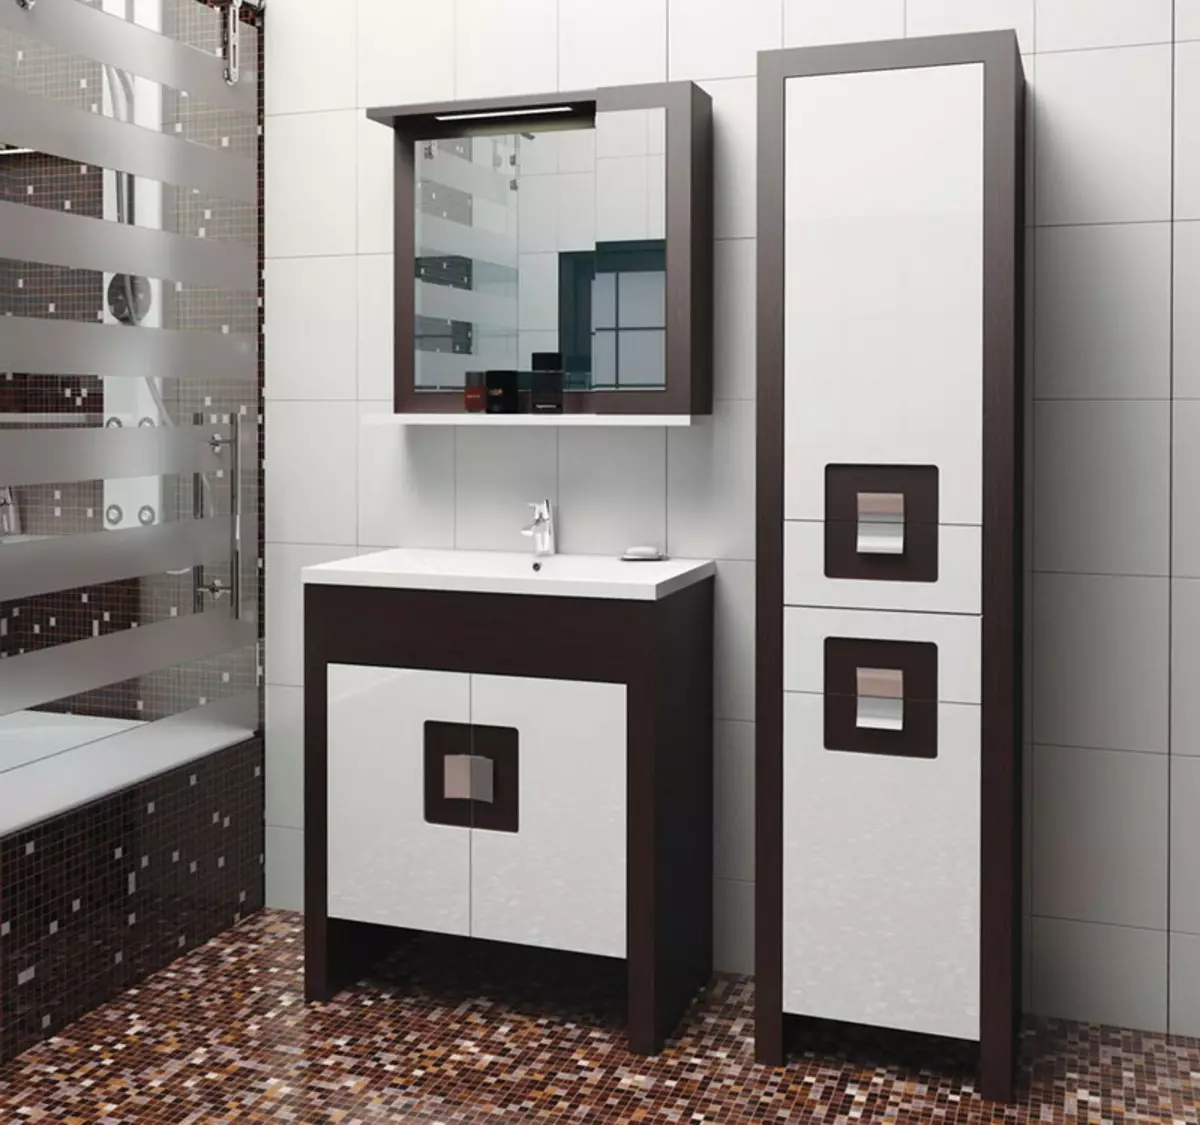 Bathroom Pencil: Overview of cabinets 25 cm wide and a depth of 20 cm, narrow models and with dimensions of 30 cm and 50 cm, 60 cm and 35 cm, outdoor, red and white 10387_54